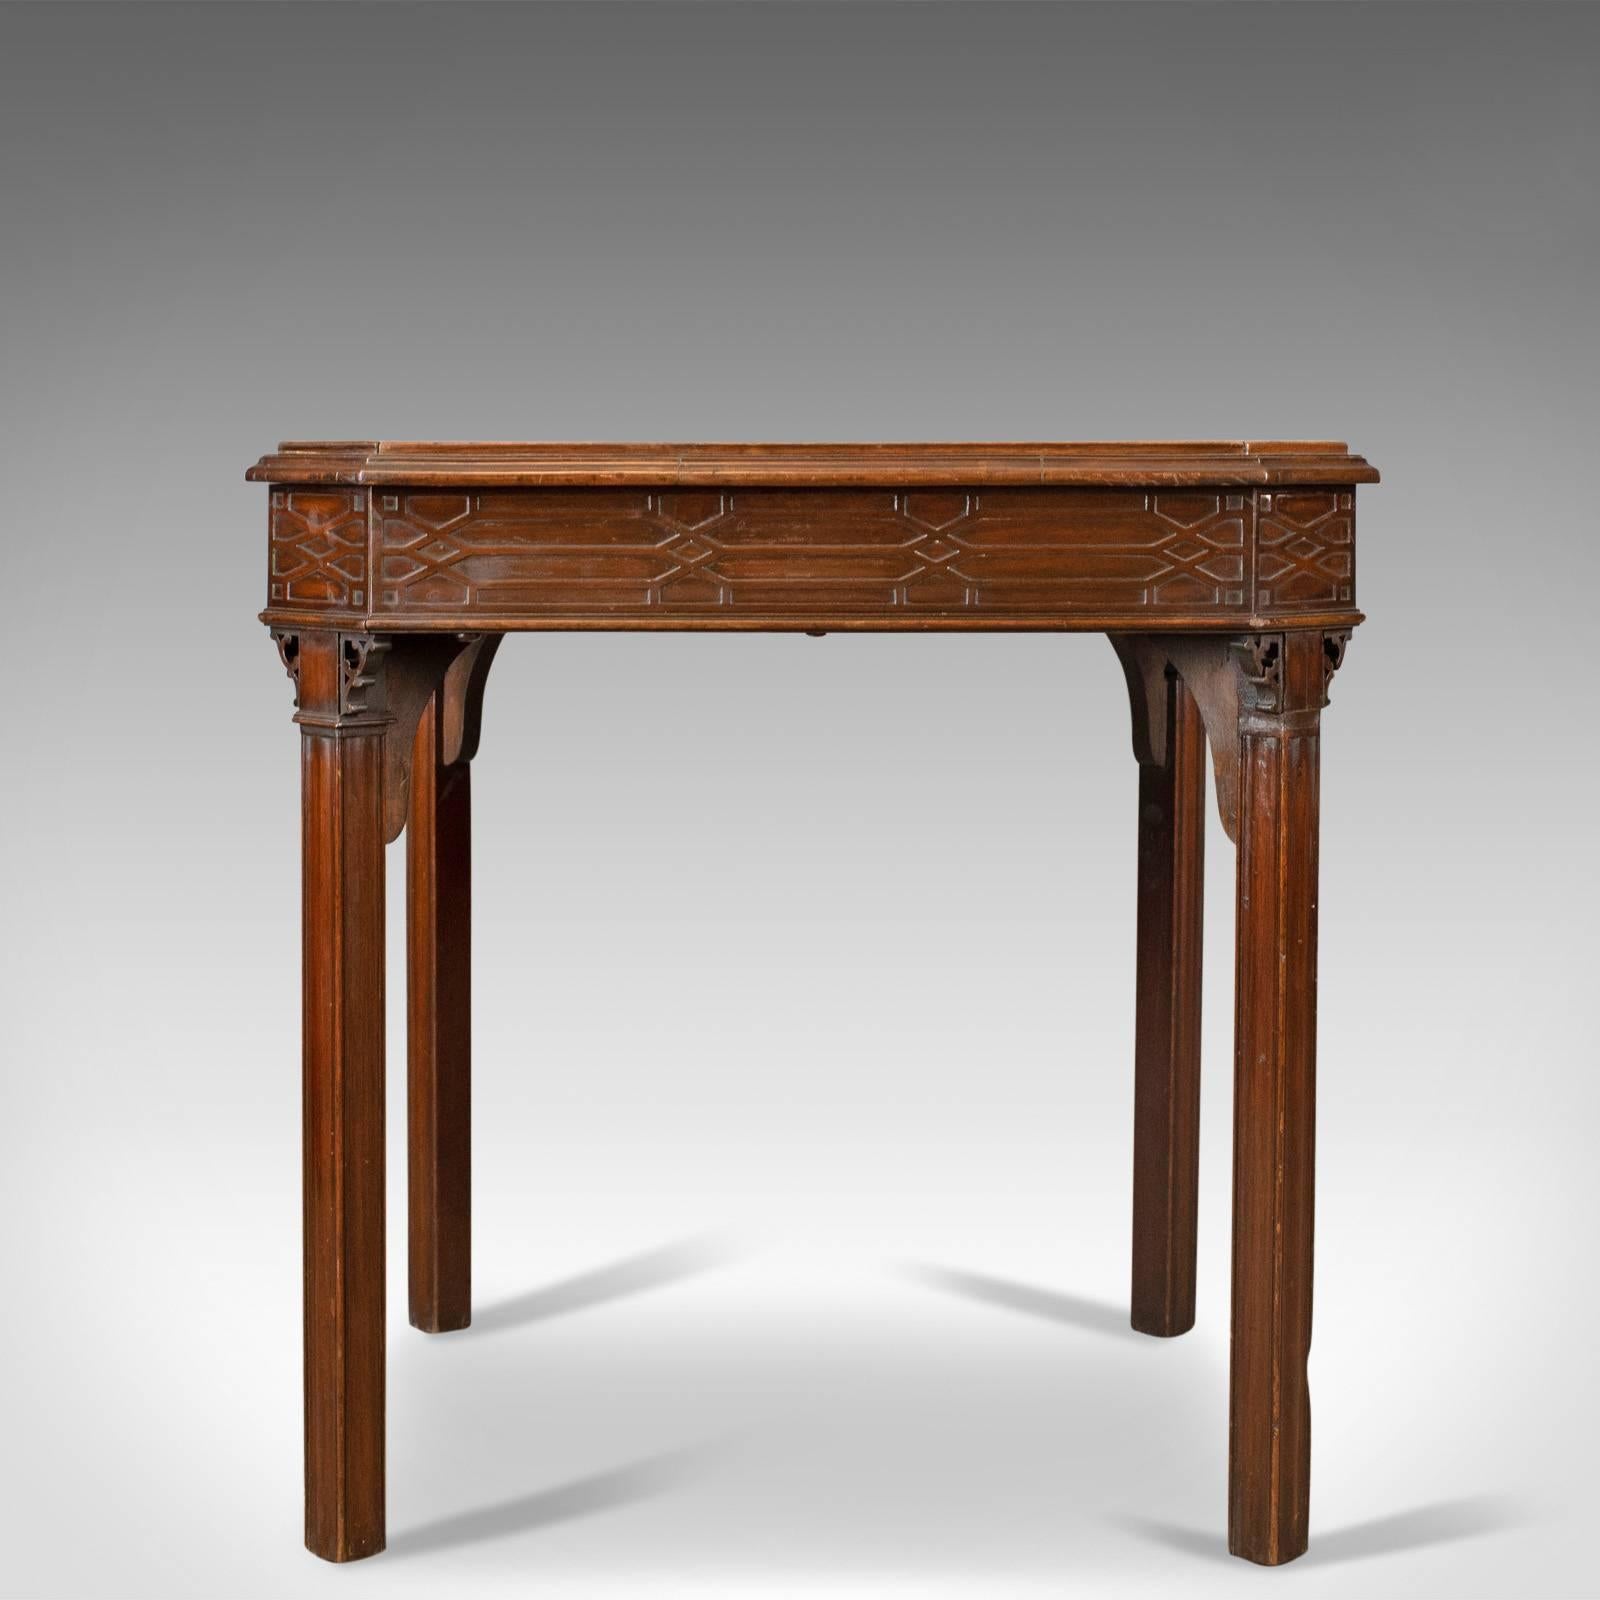 This is an antique games table, an English, Georgian, mahogany card table with oriental overtones dating to circa 1800.

Delightful square table with canted corners
Displaying oriental influence in the blind fret, frieze decoration
Raised on